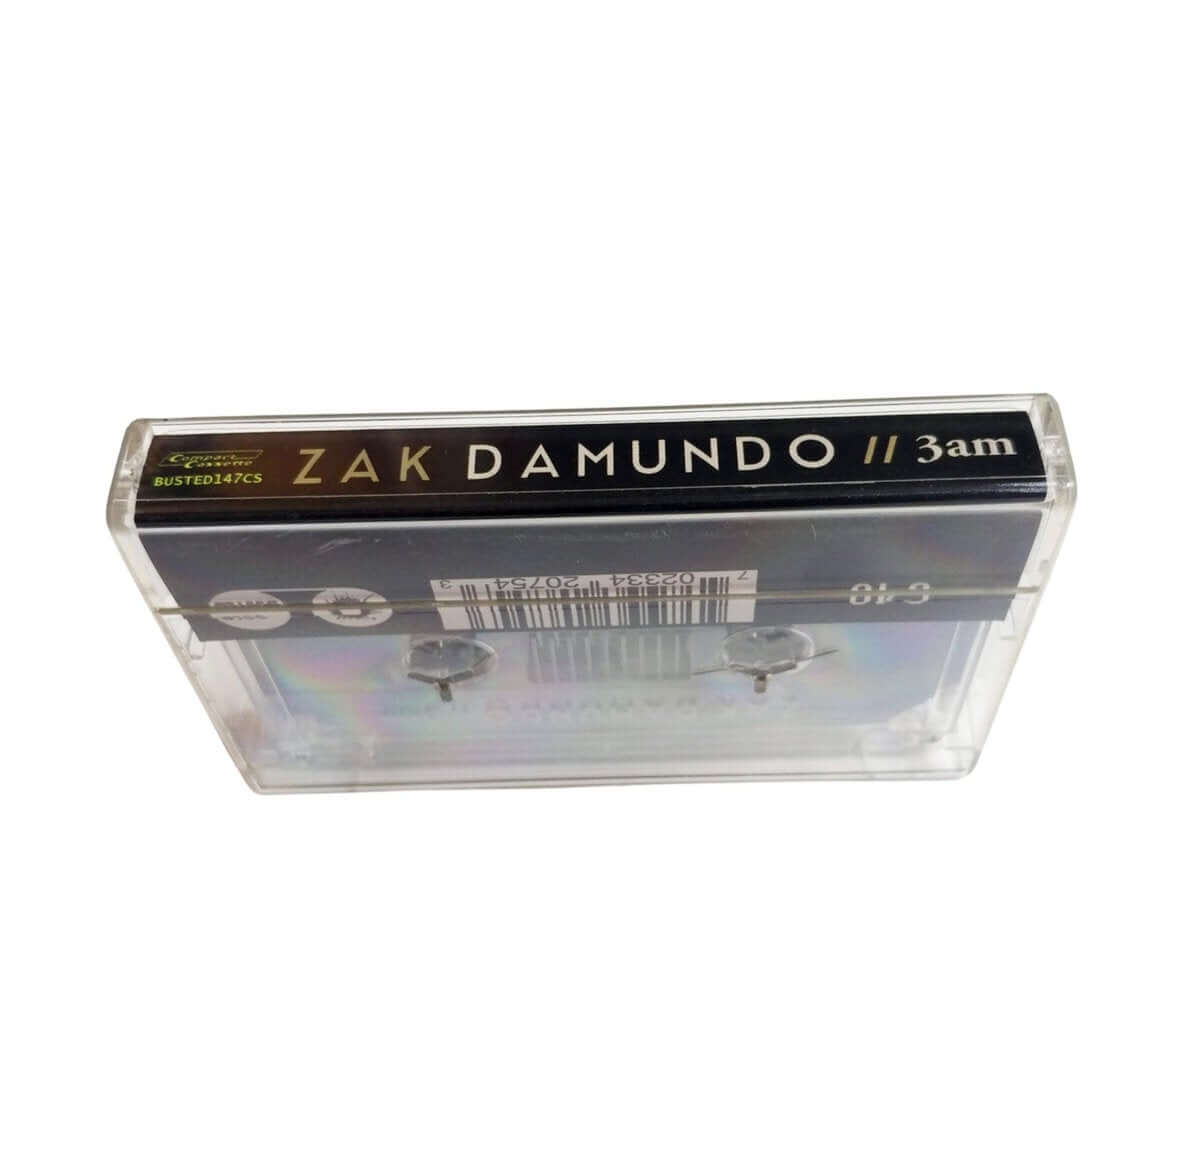 Zak Damundo - 3am - Limited Edition Cassette Continuously Mixed - Cold Busted